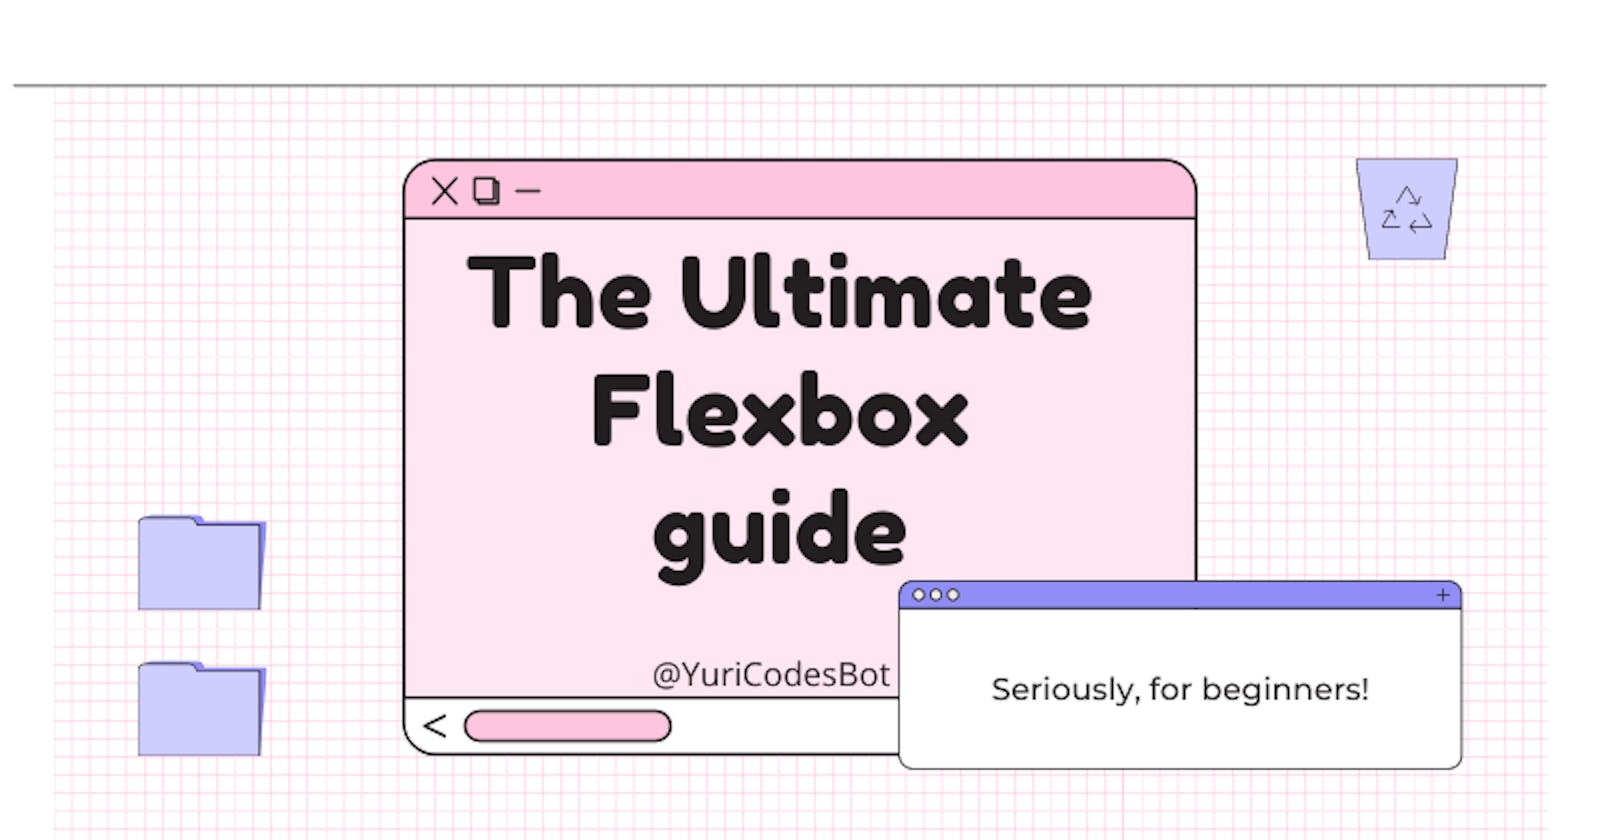 The ultimate guide to Flexbox